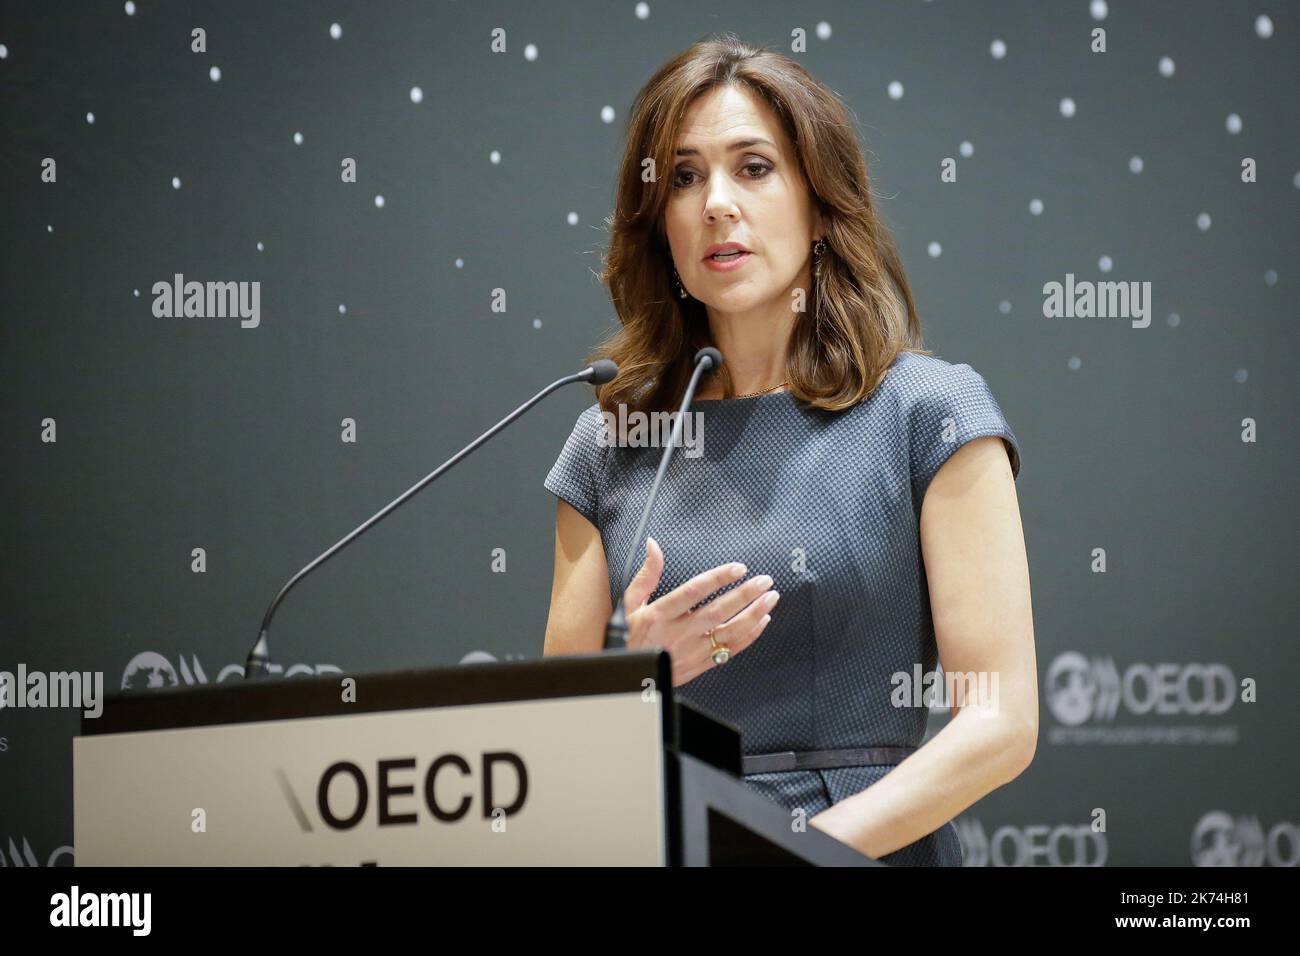 The Danish Crown Princess Mary delivers speech at the round table ' Pink Collar, Blue Collar ' during the Forum 2017 at the OECD (Organisation for Economic Co-operation and Development) headquarters in Paris, France Stock Photo